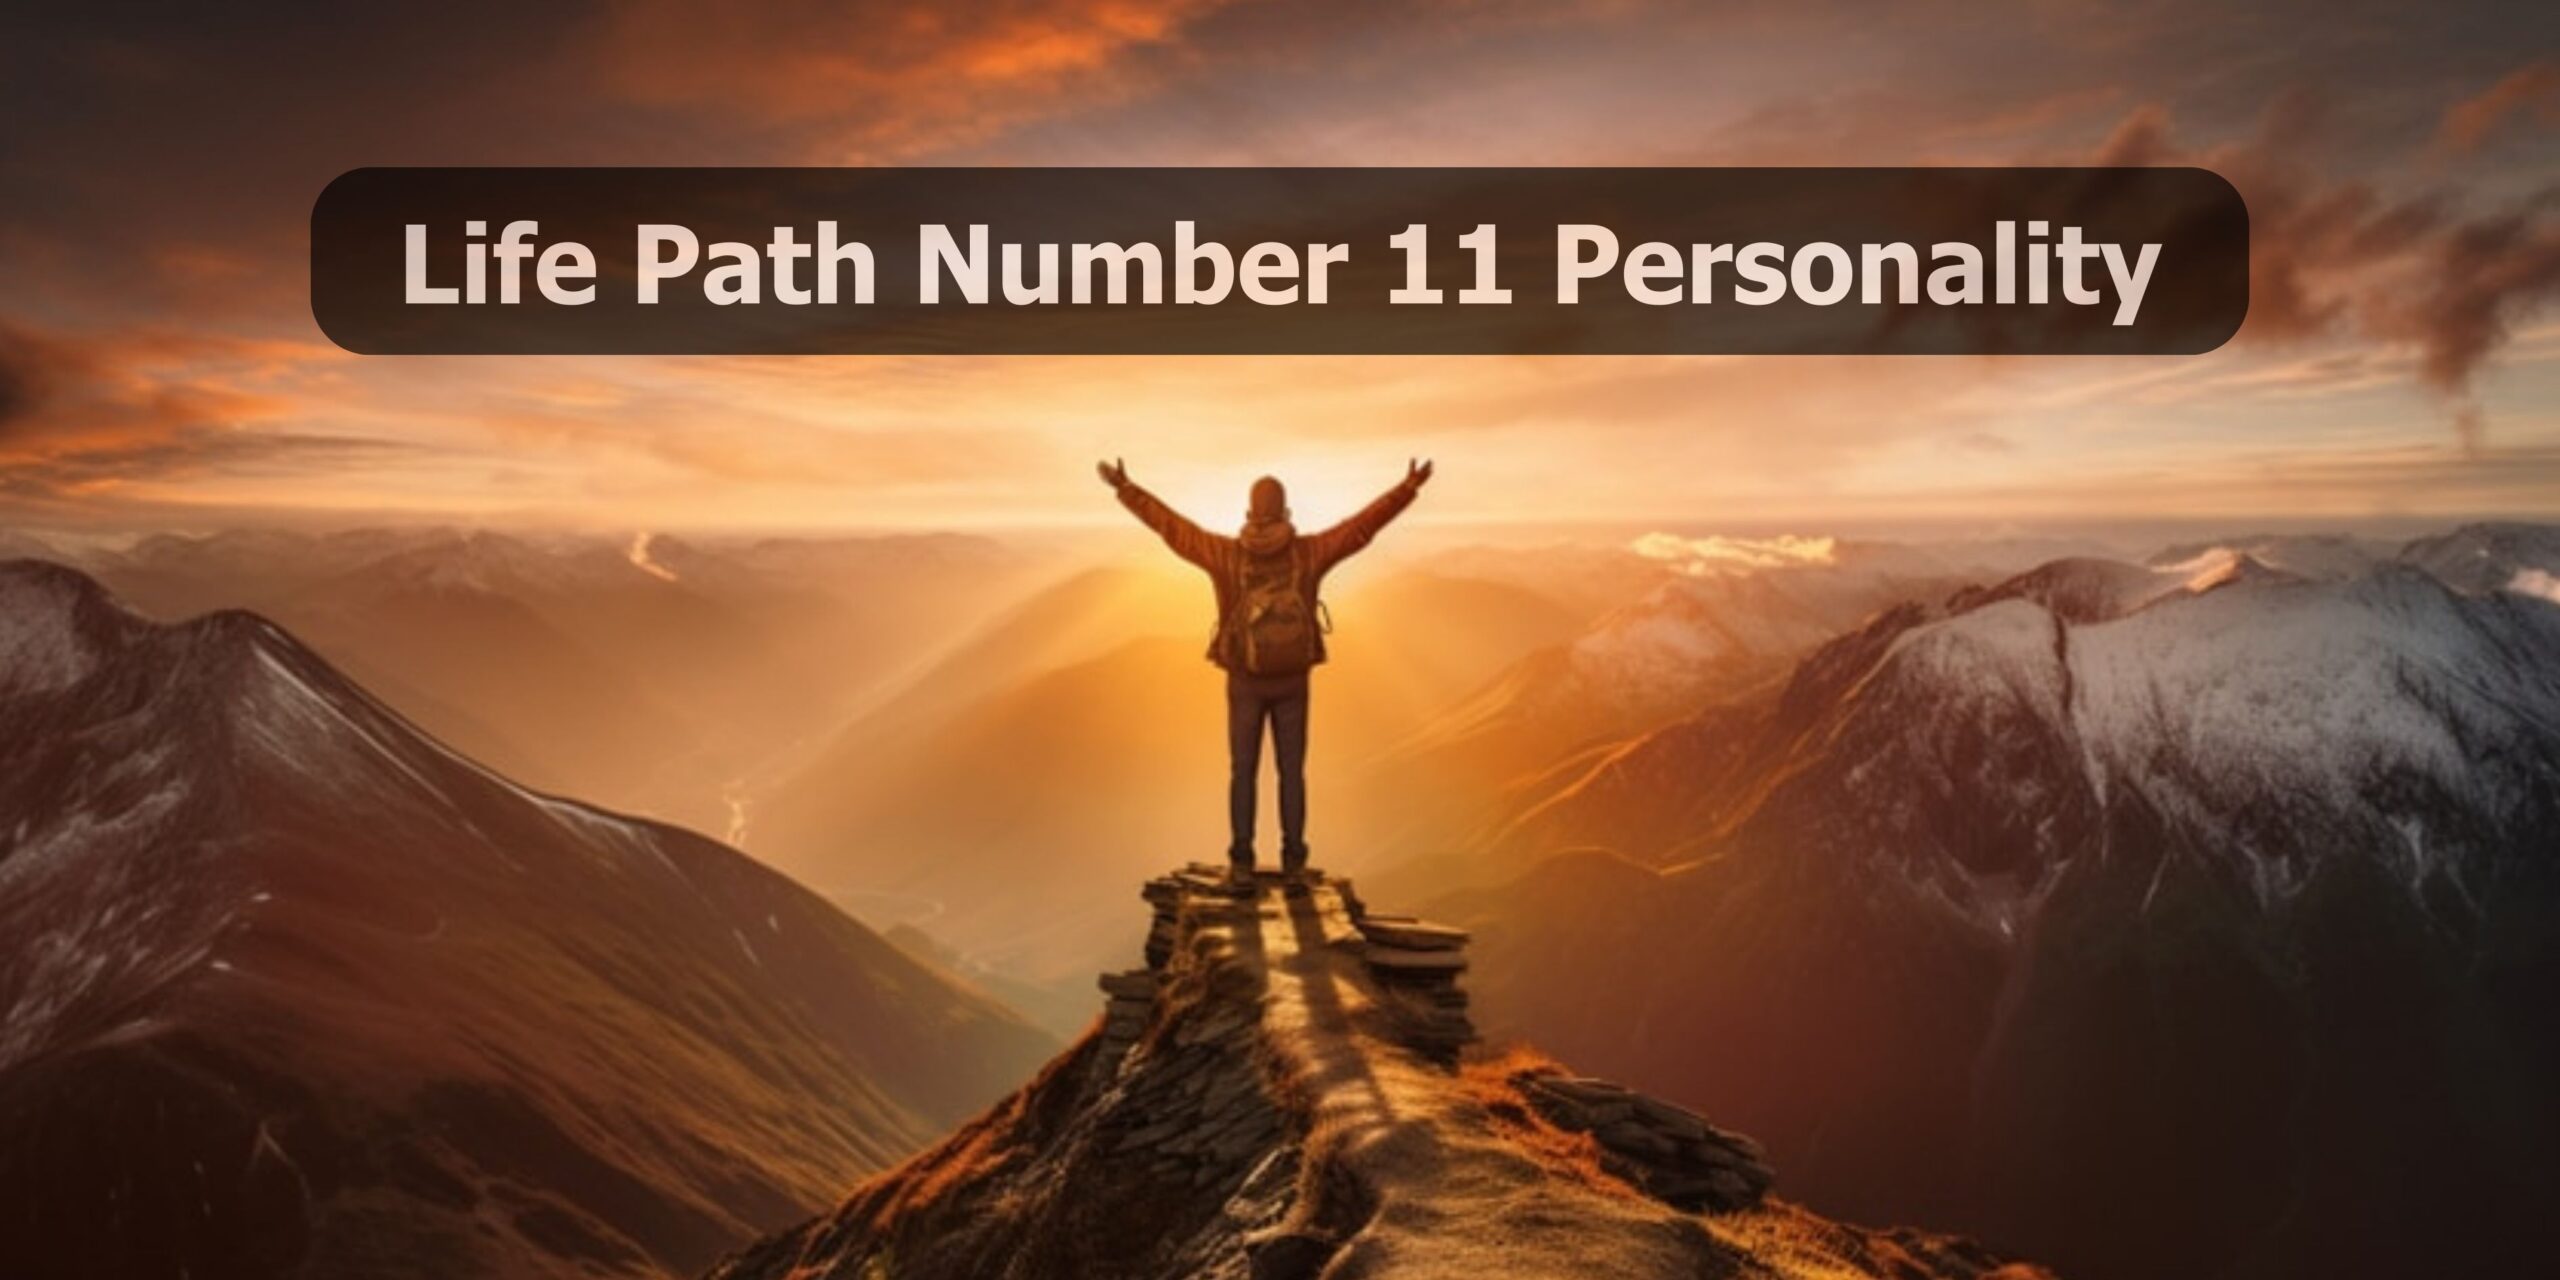 Life Path Number 11 Personality